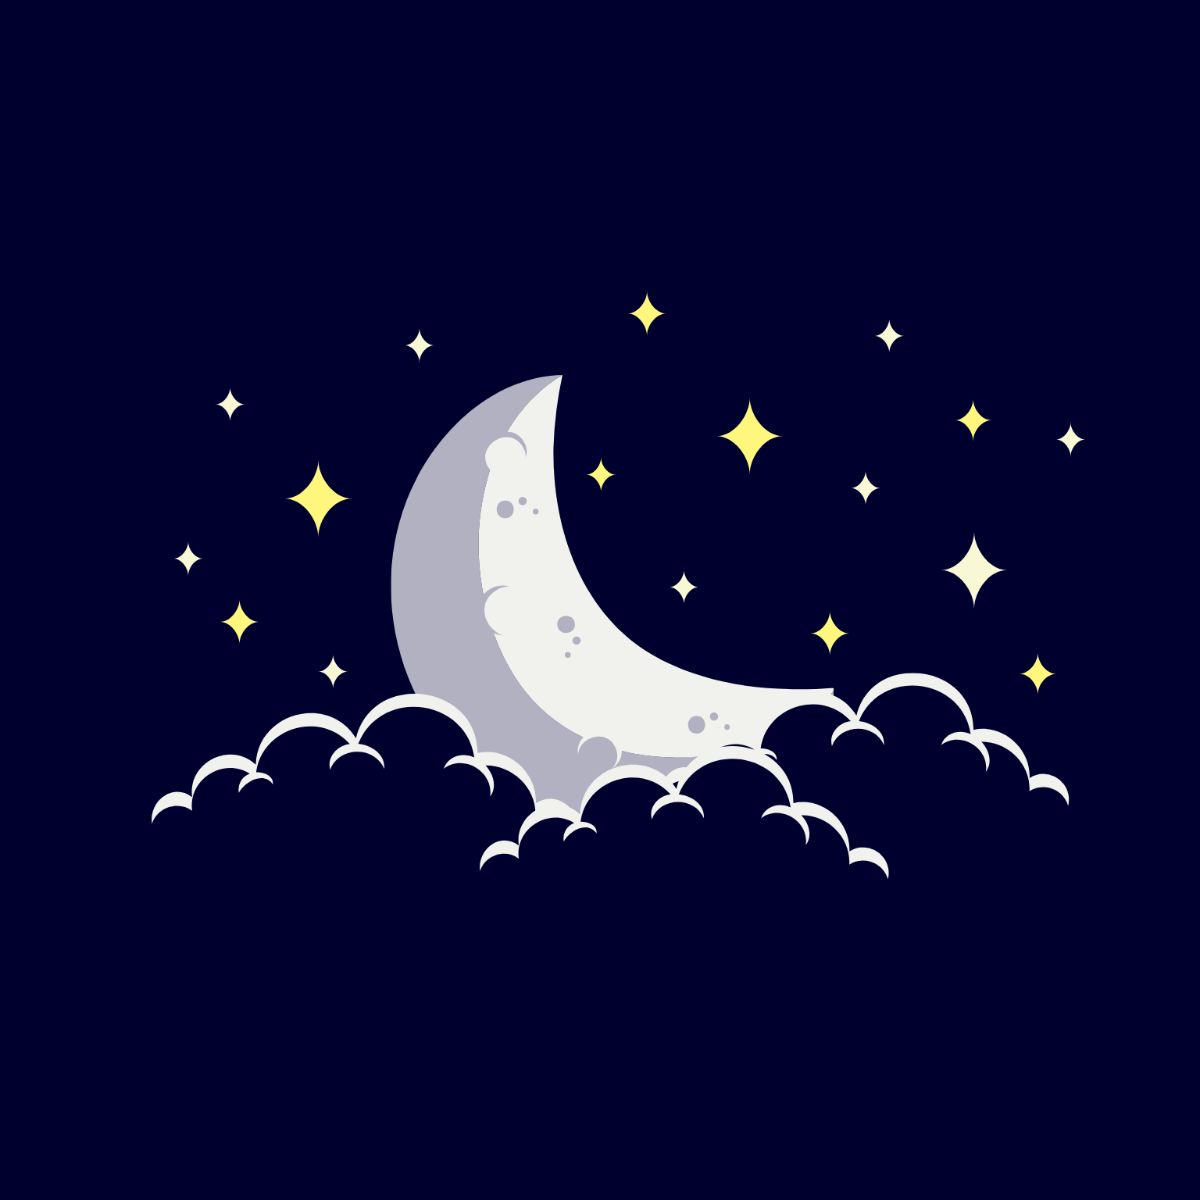 Free Crescent Moon and Star Vector Template